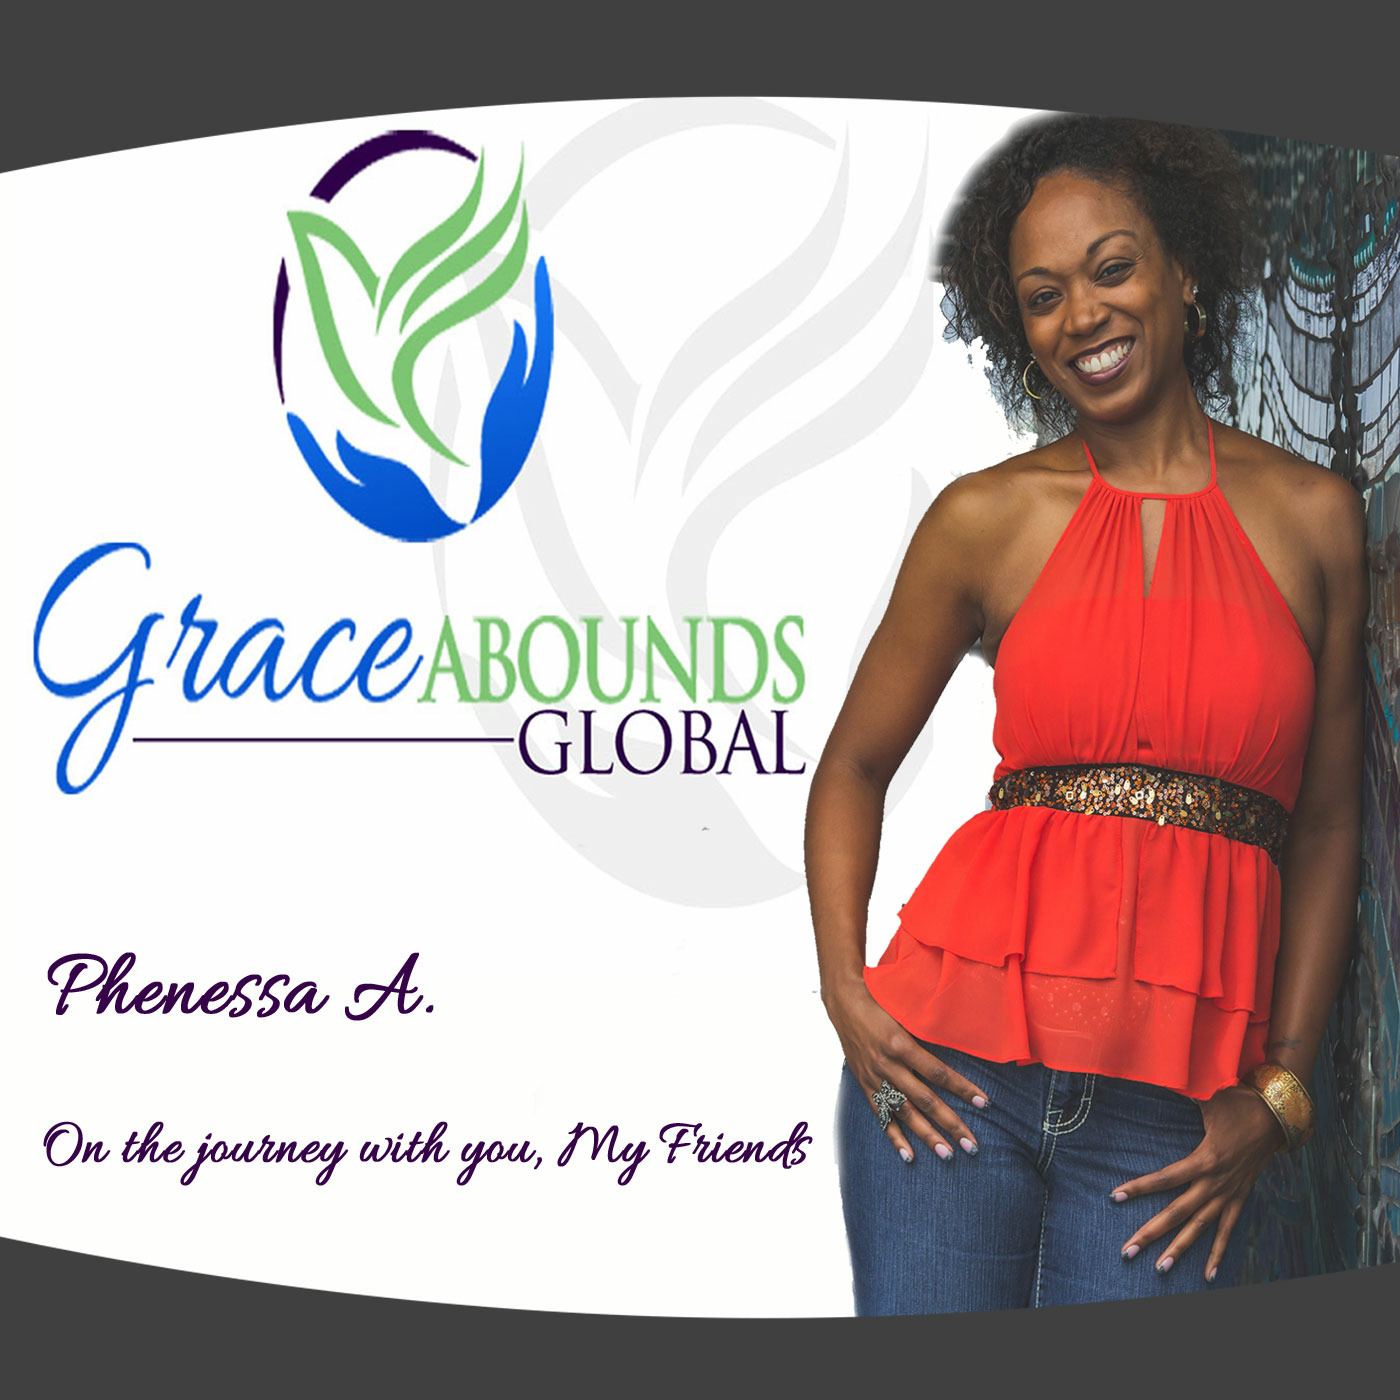 Grace Abounds Global